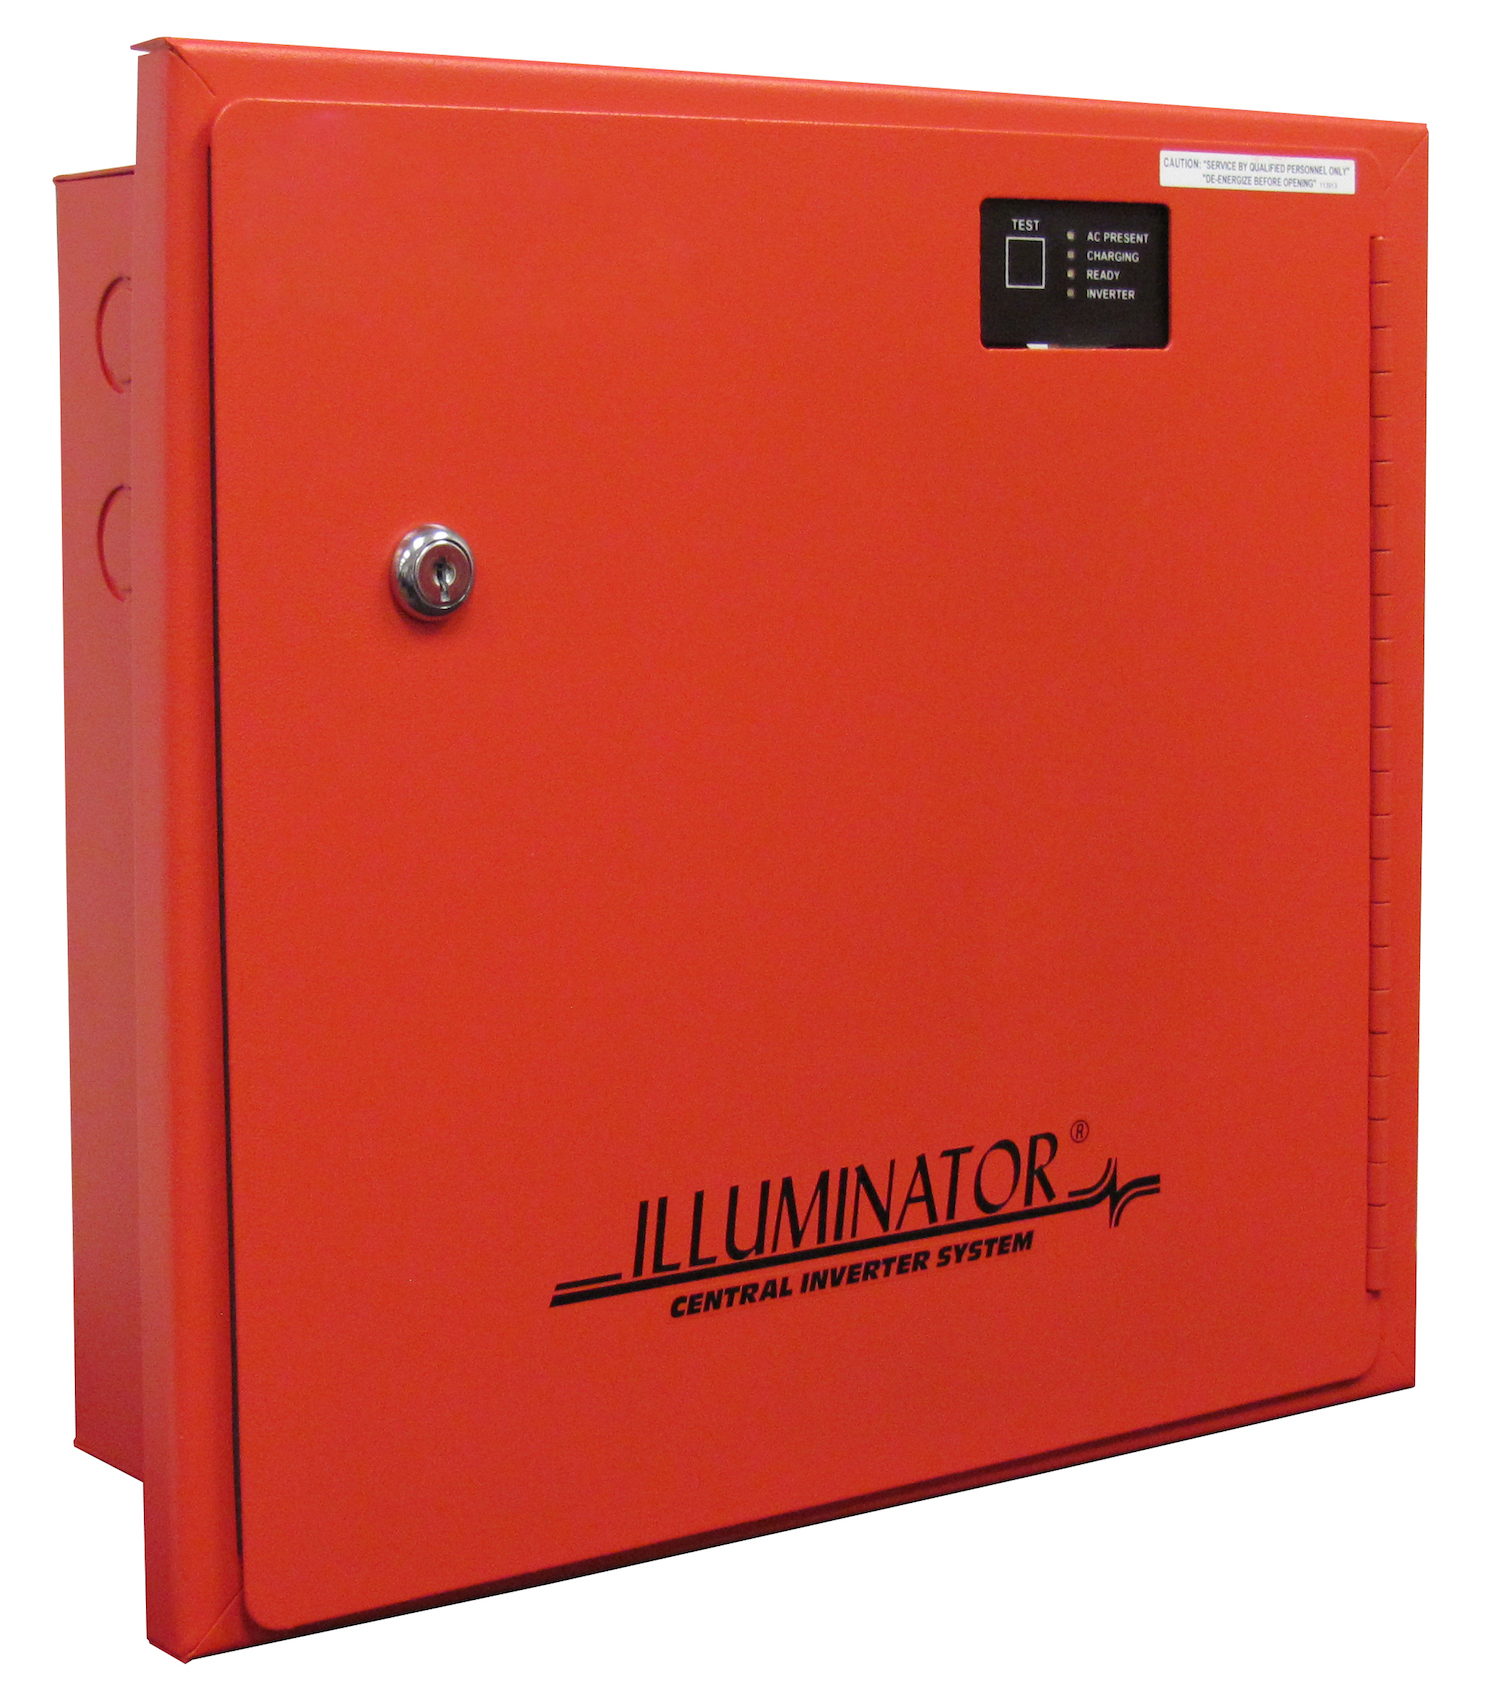 Myers Emergency Power Systems & Industrial Backup Power